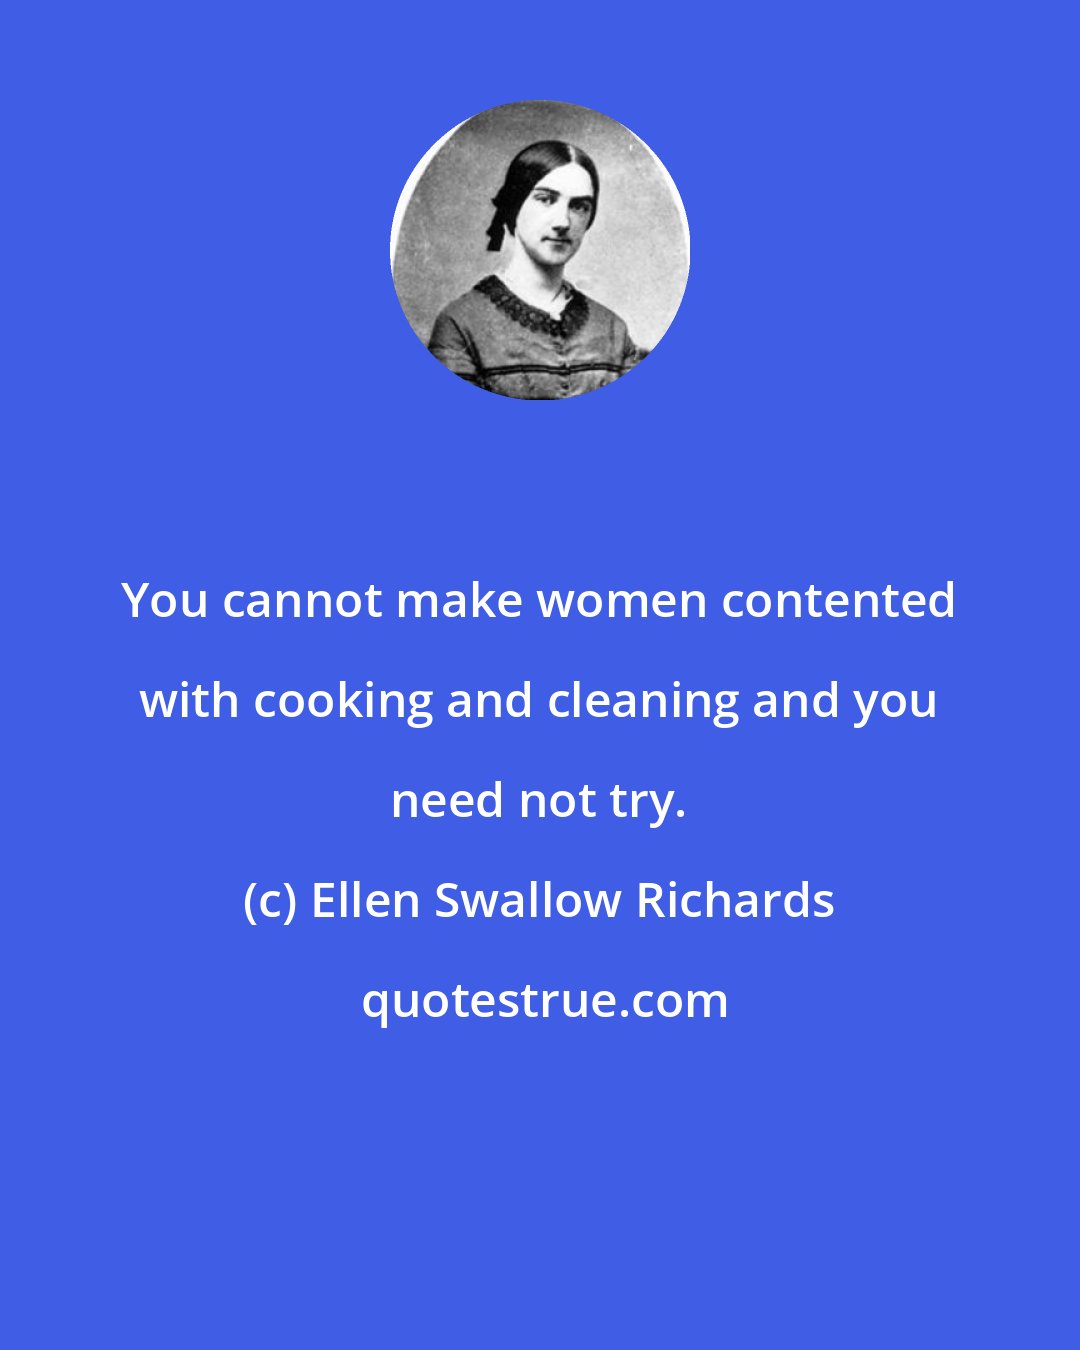 Ellen Swallow Richards: You cannot make women contented with cooking and cleaning and you need not try.